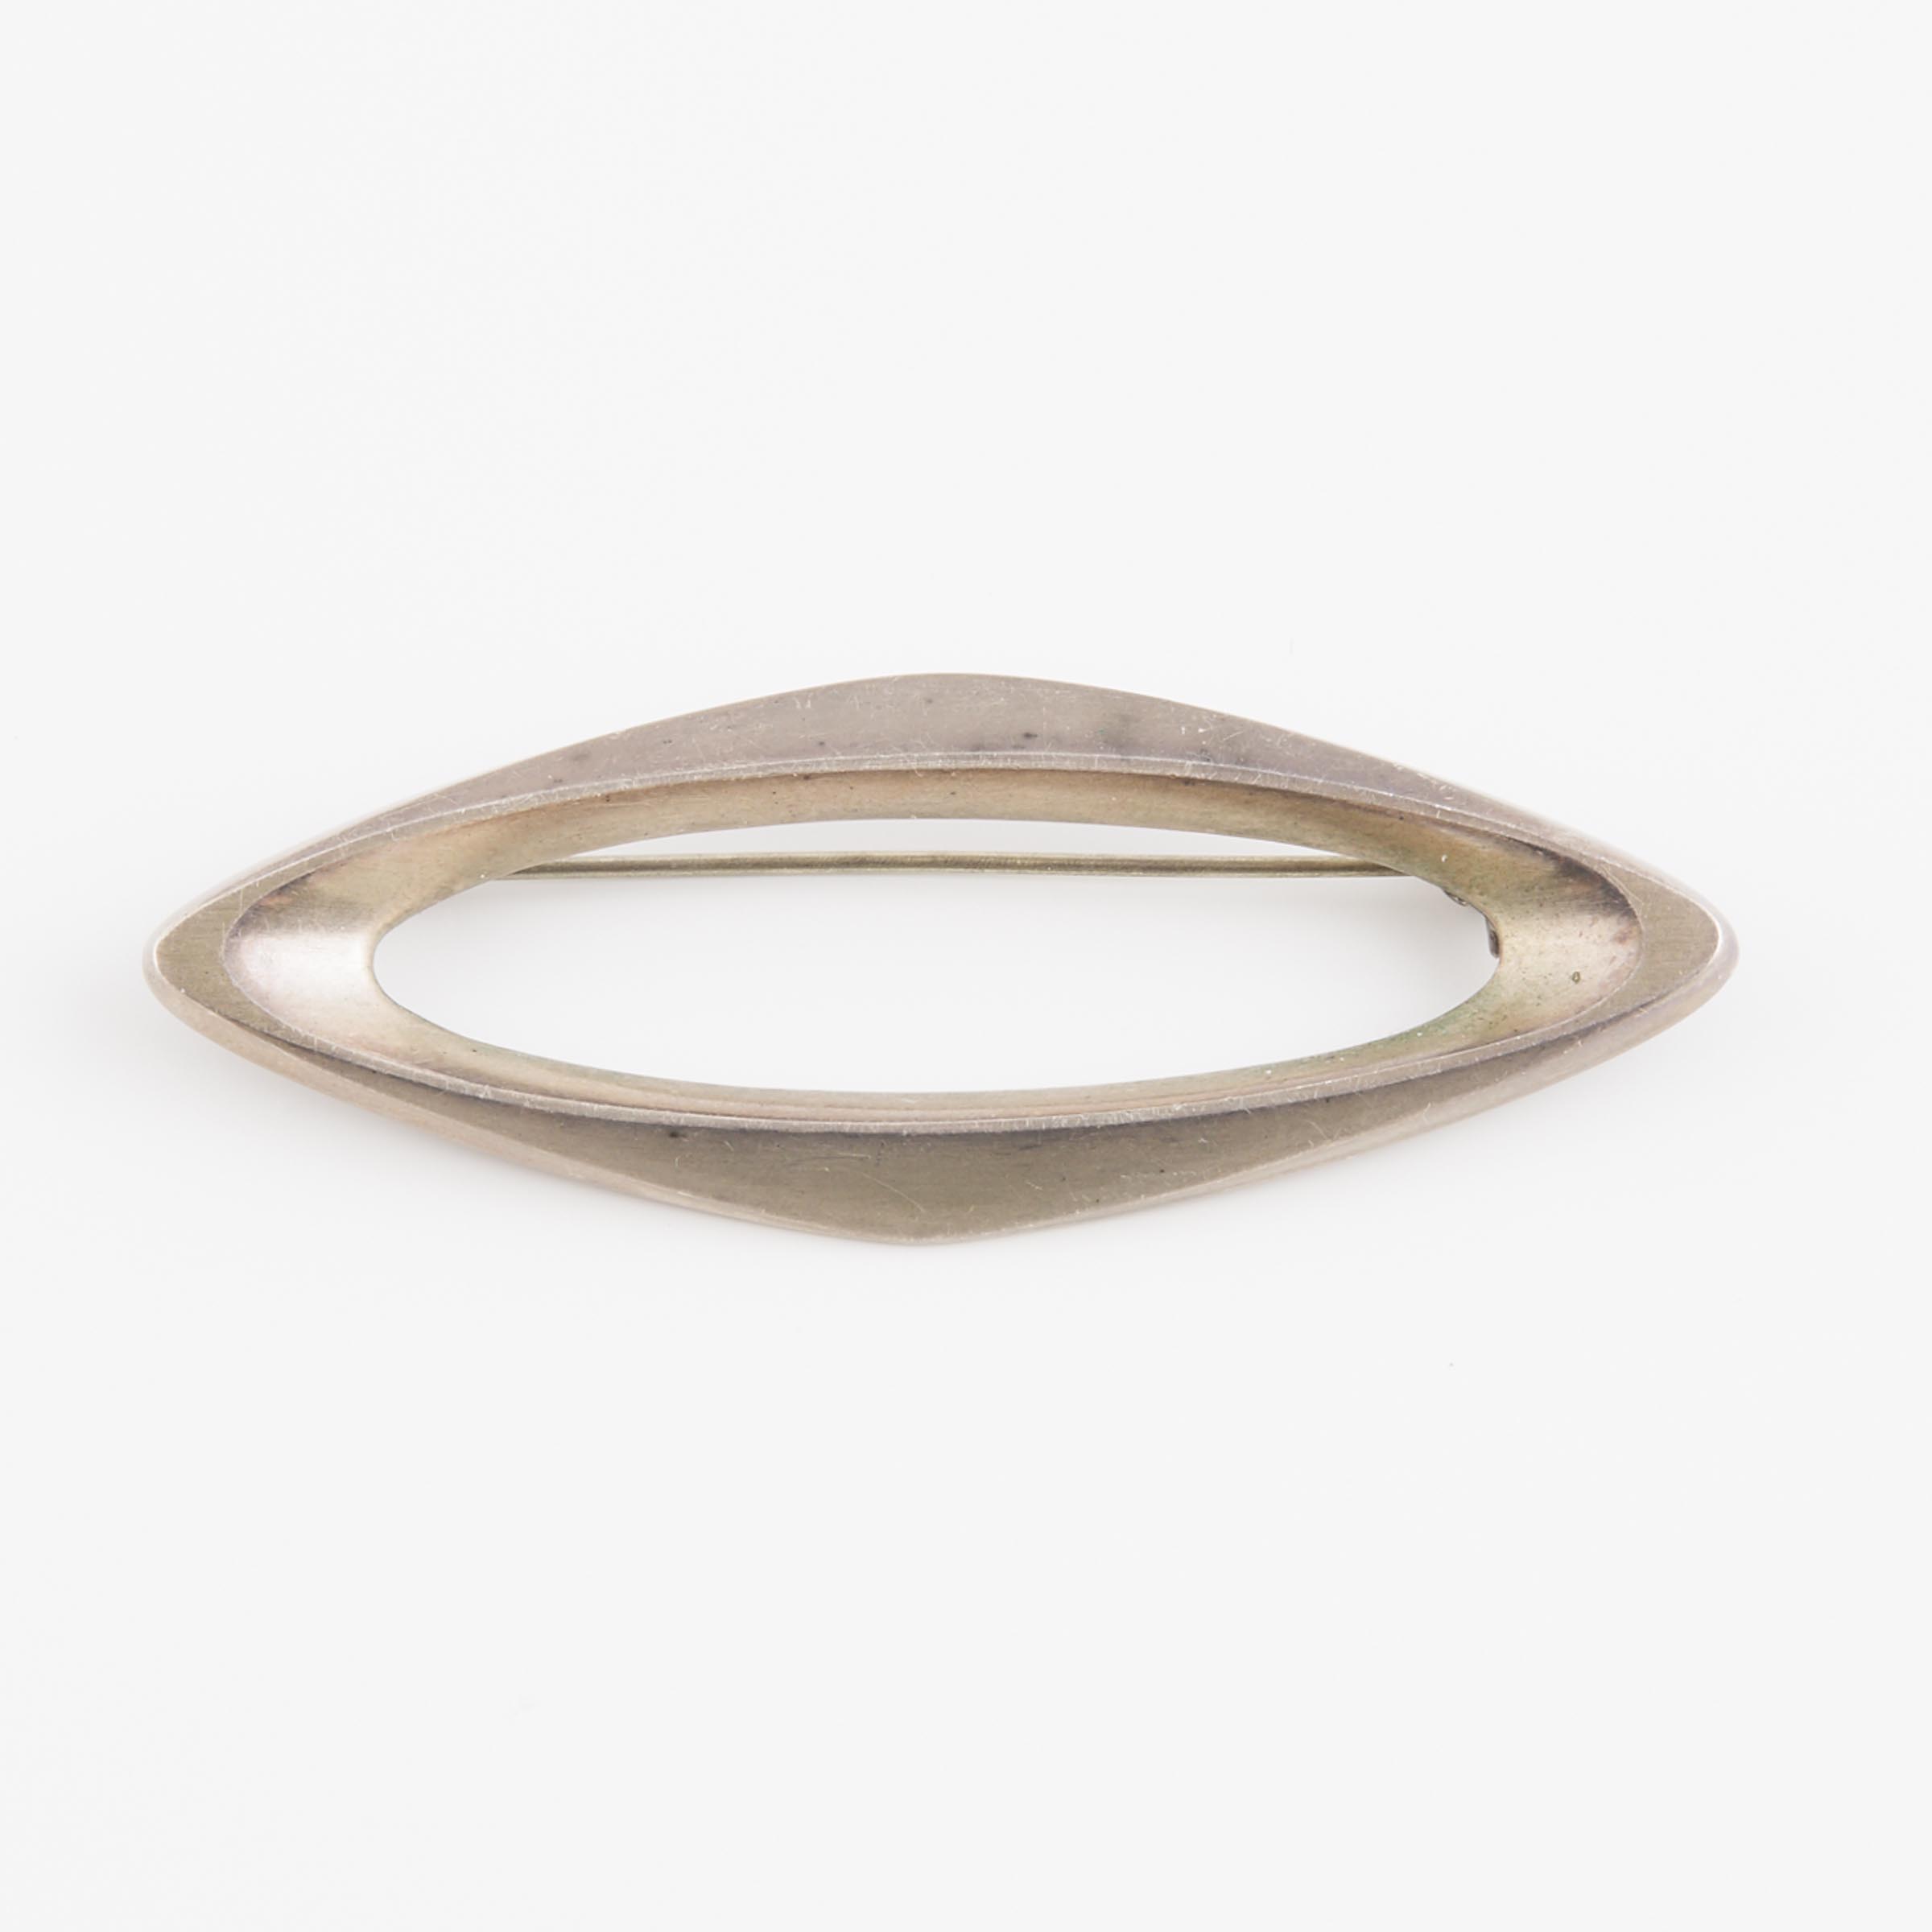 Poul Warmind Danish Sterling Silver Oval Pin